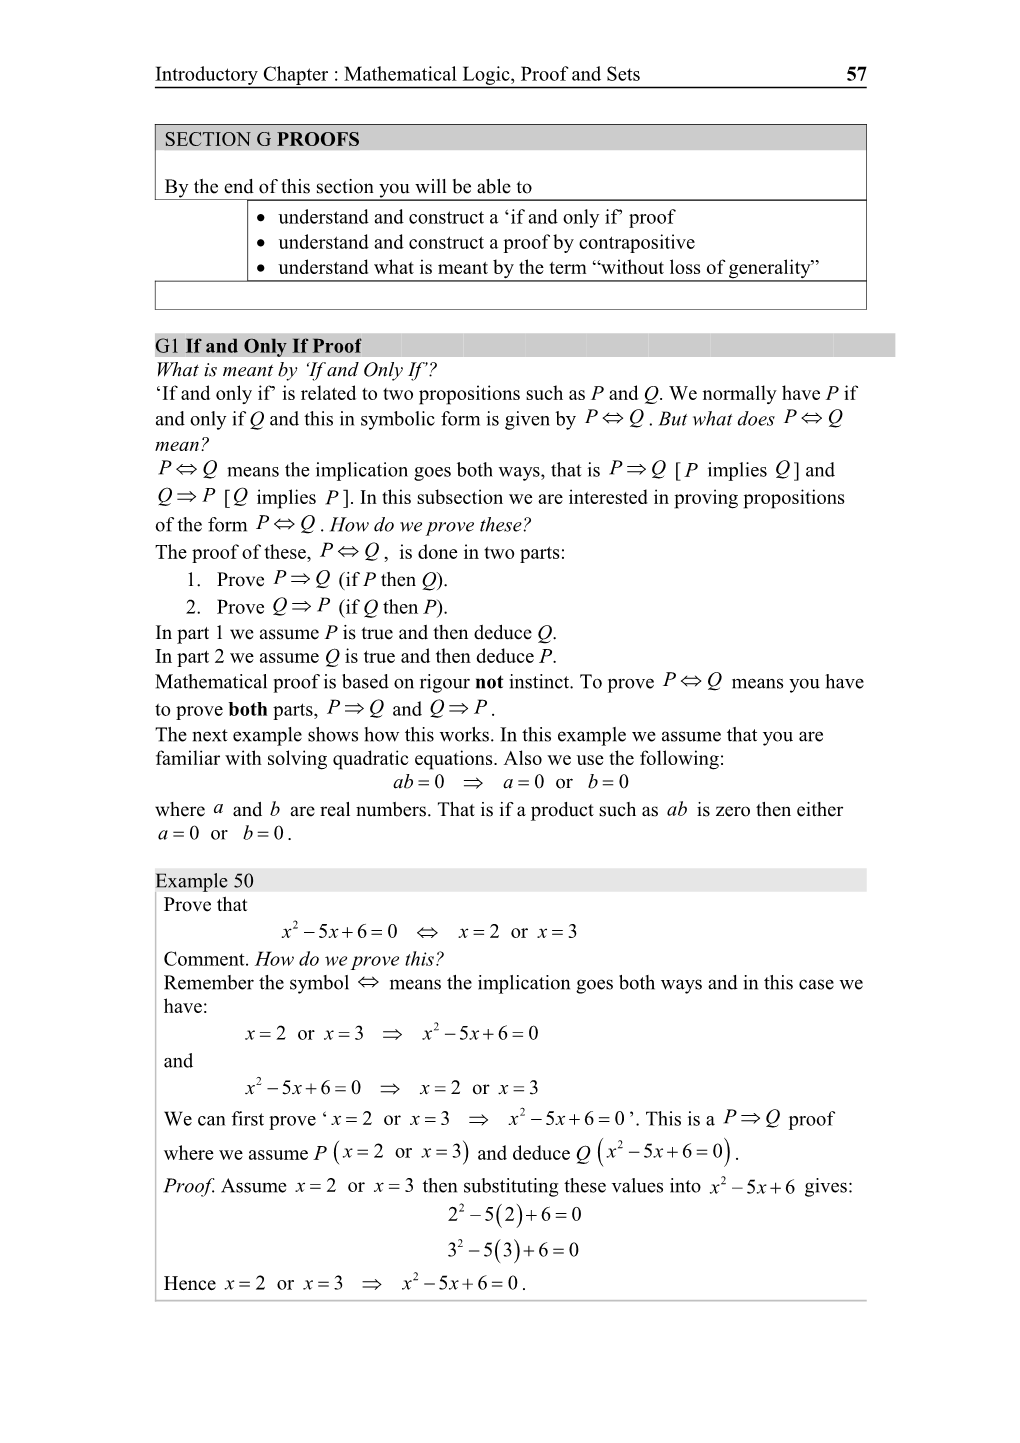 Introductory Chapter : Mathematical Logic, Proof and Sets1